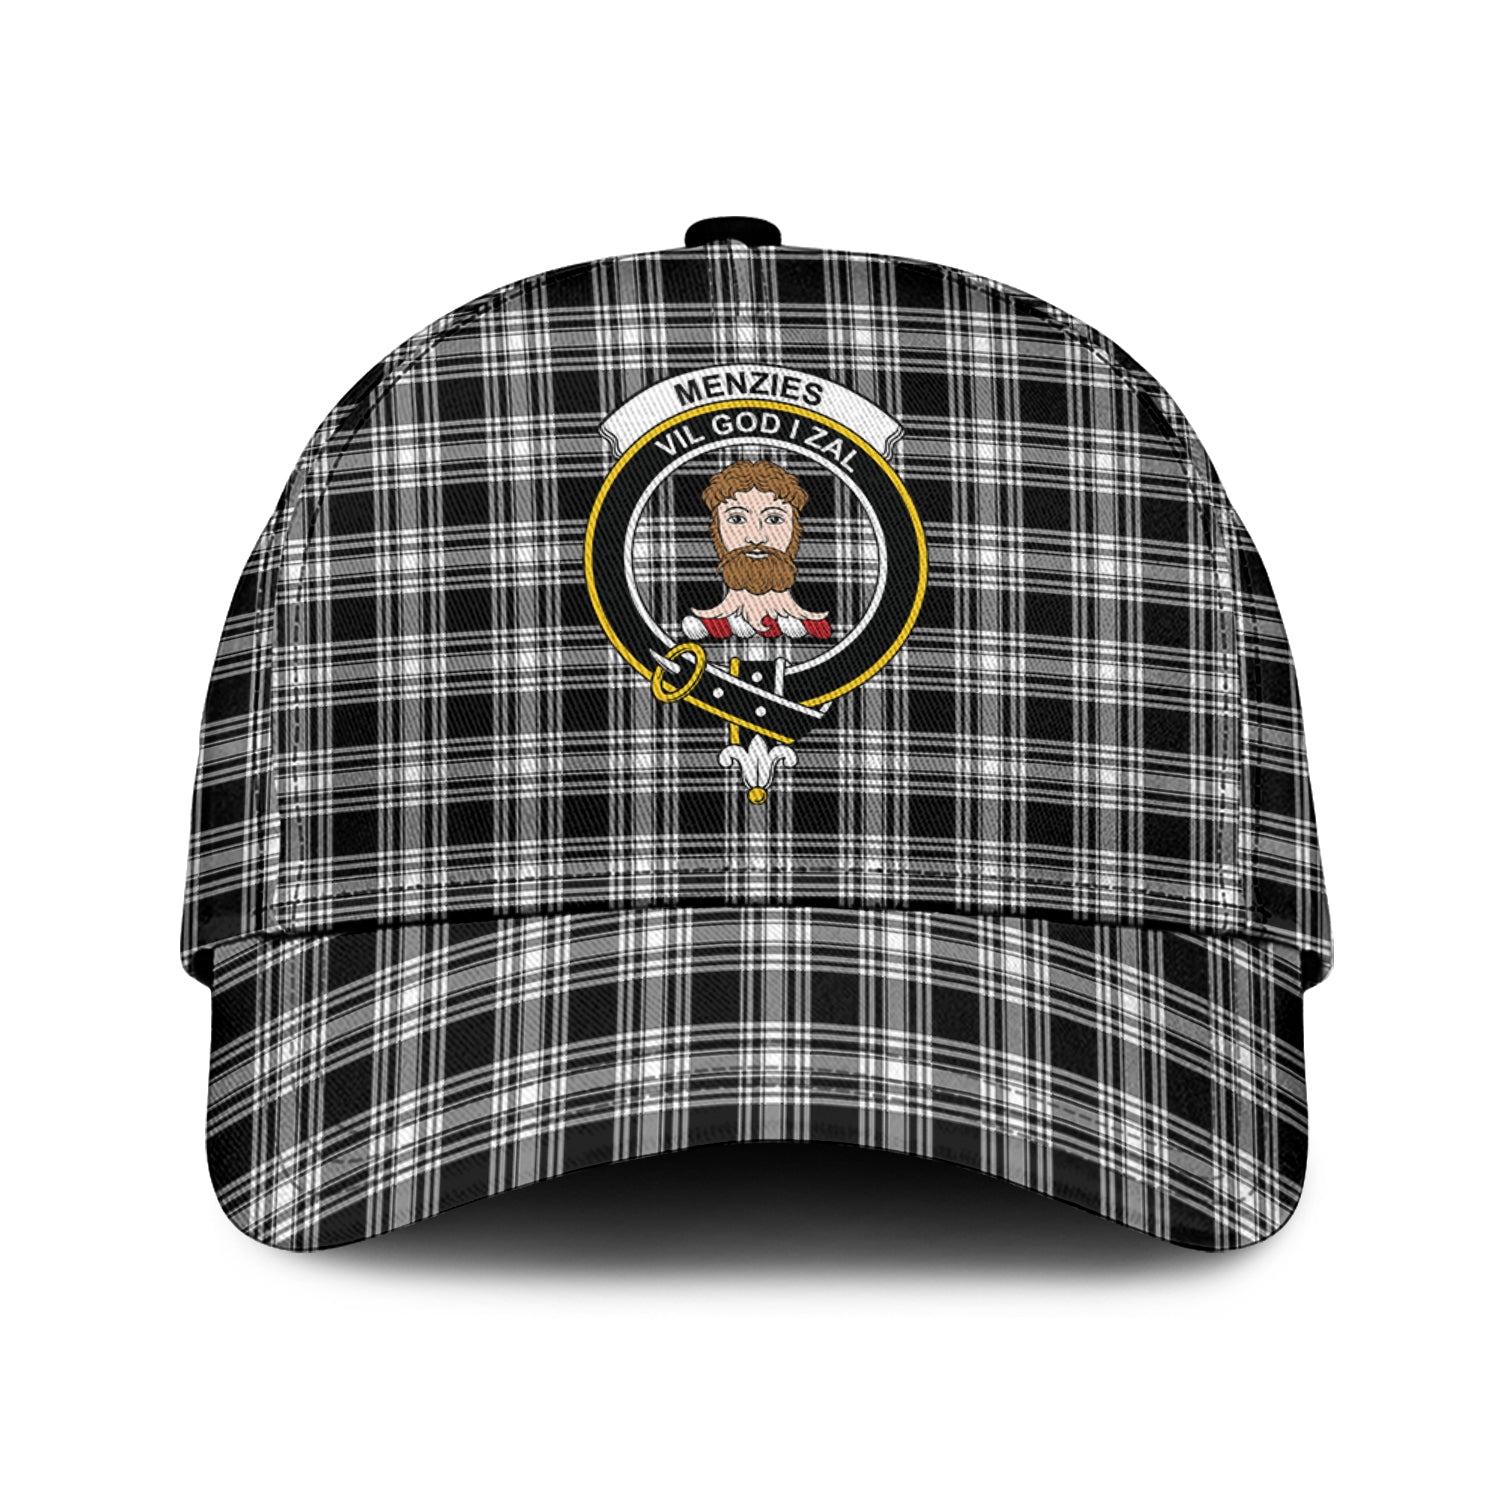 menzies-black-and-white-tartan-classic-cap-with-family-crest